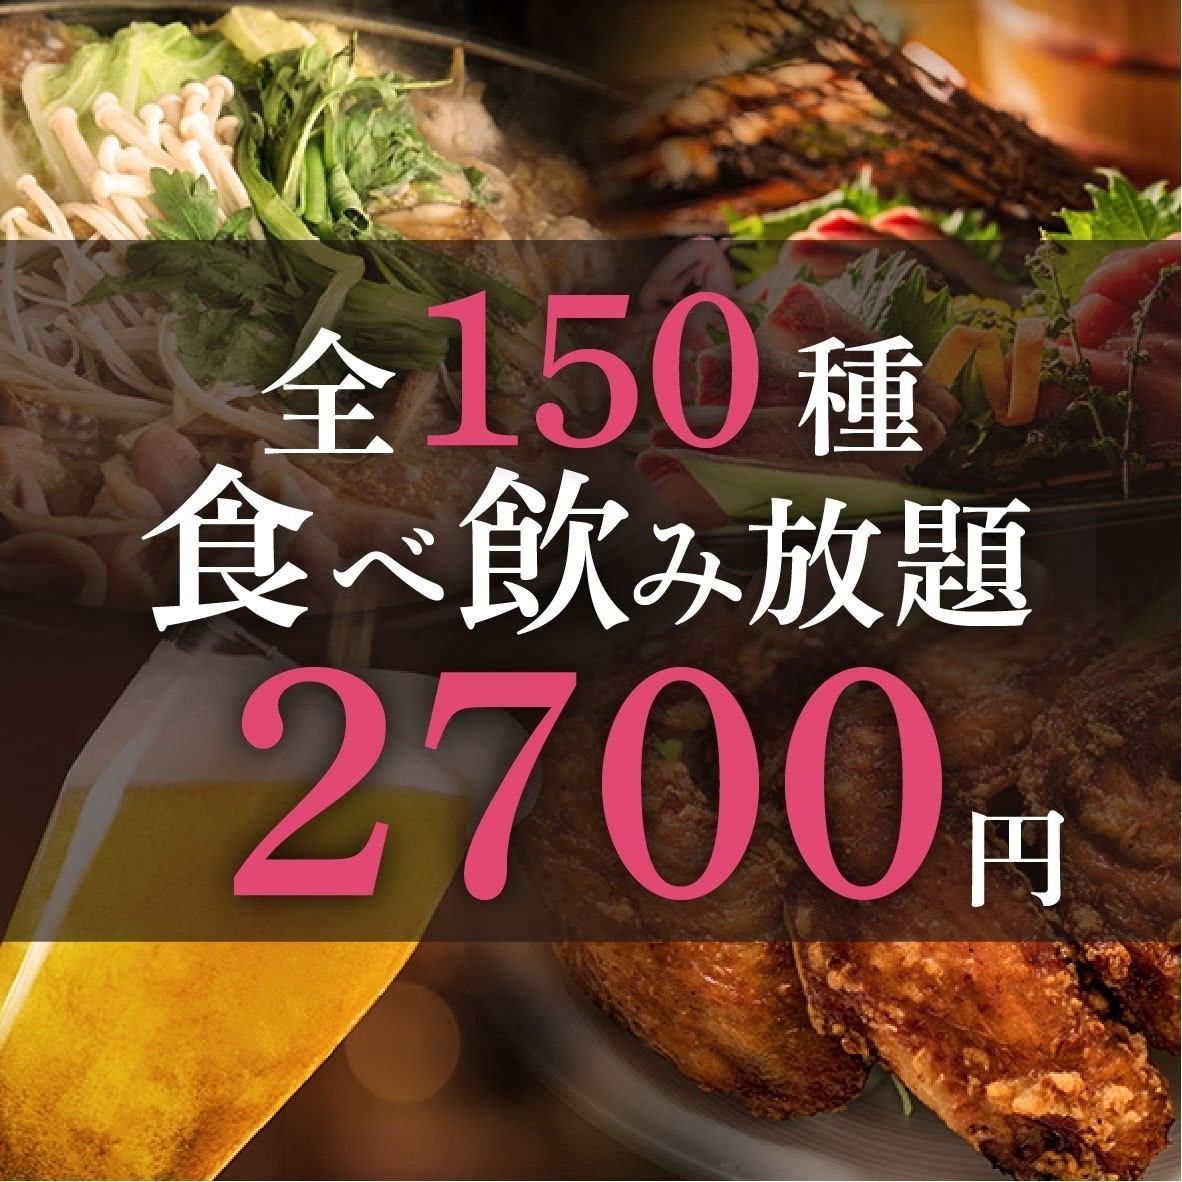 We have many all-you-can-eat and drink courses starting from 2,700 yen♪ Great for pick-up parties or drinking parties!